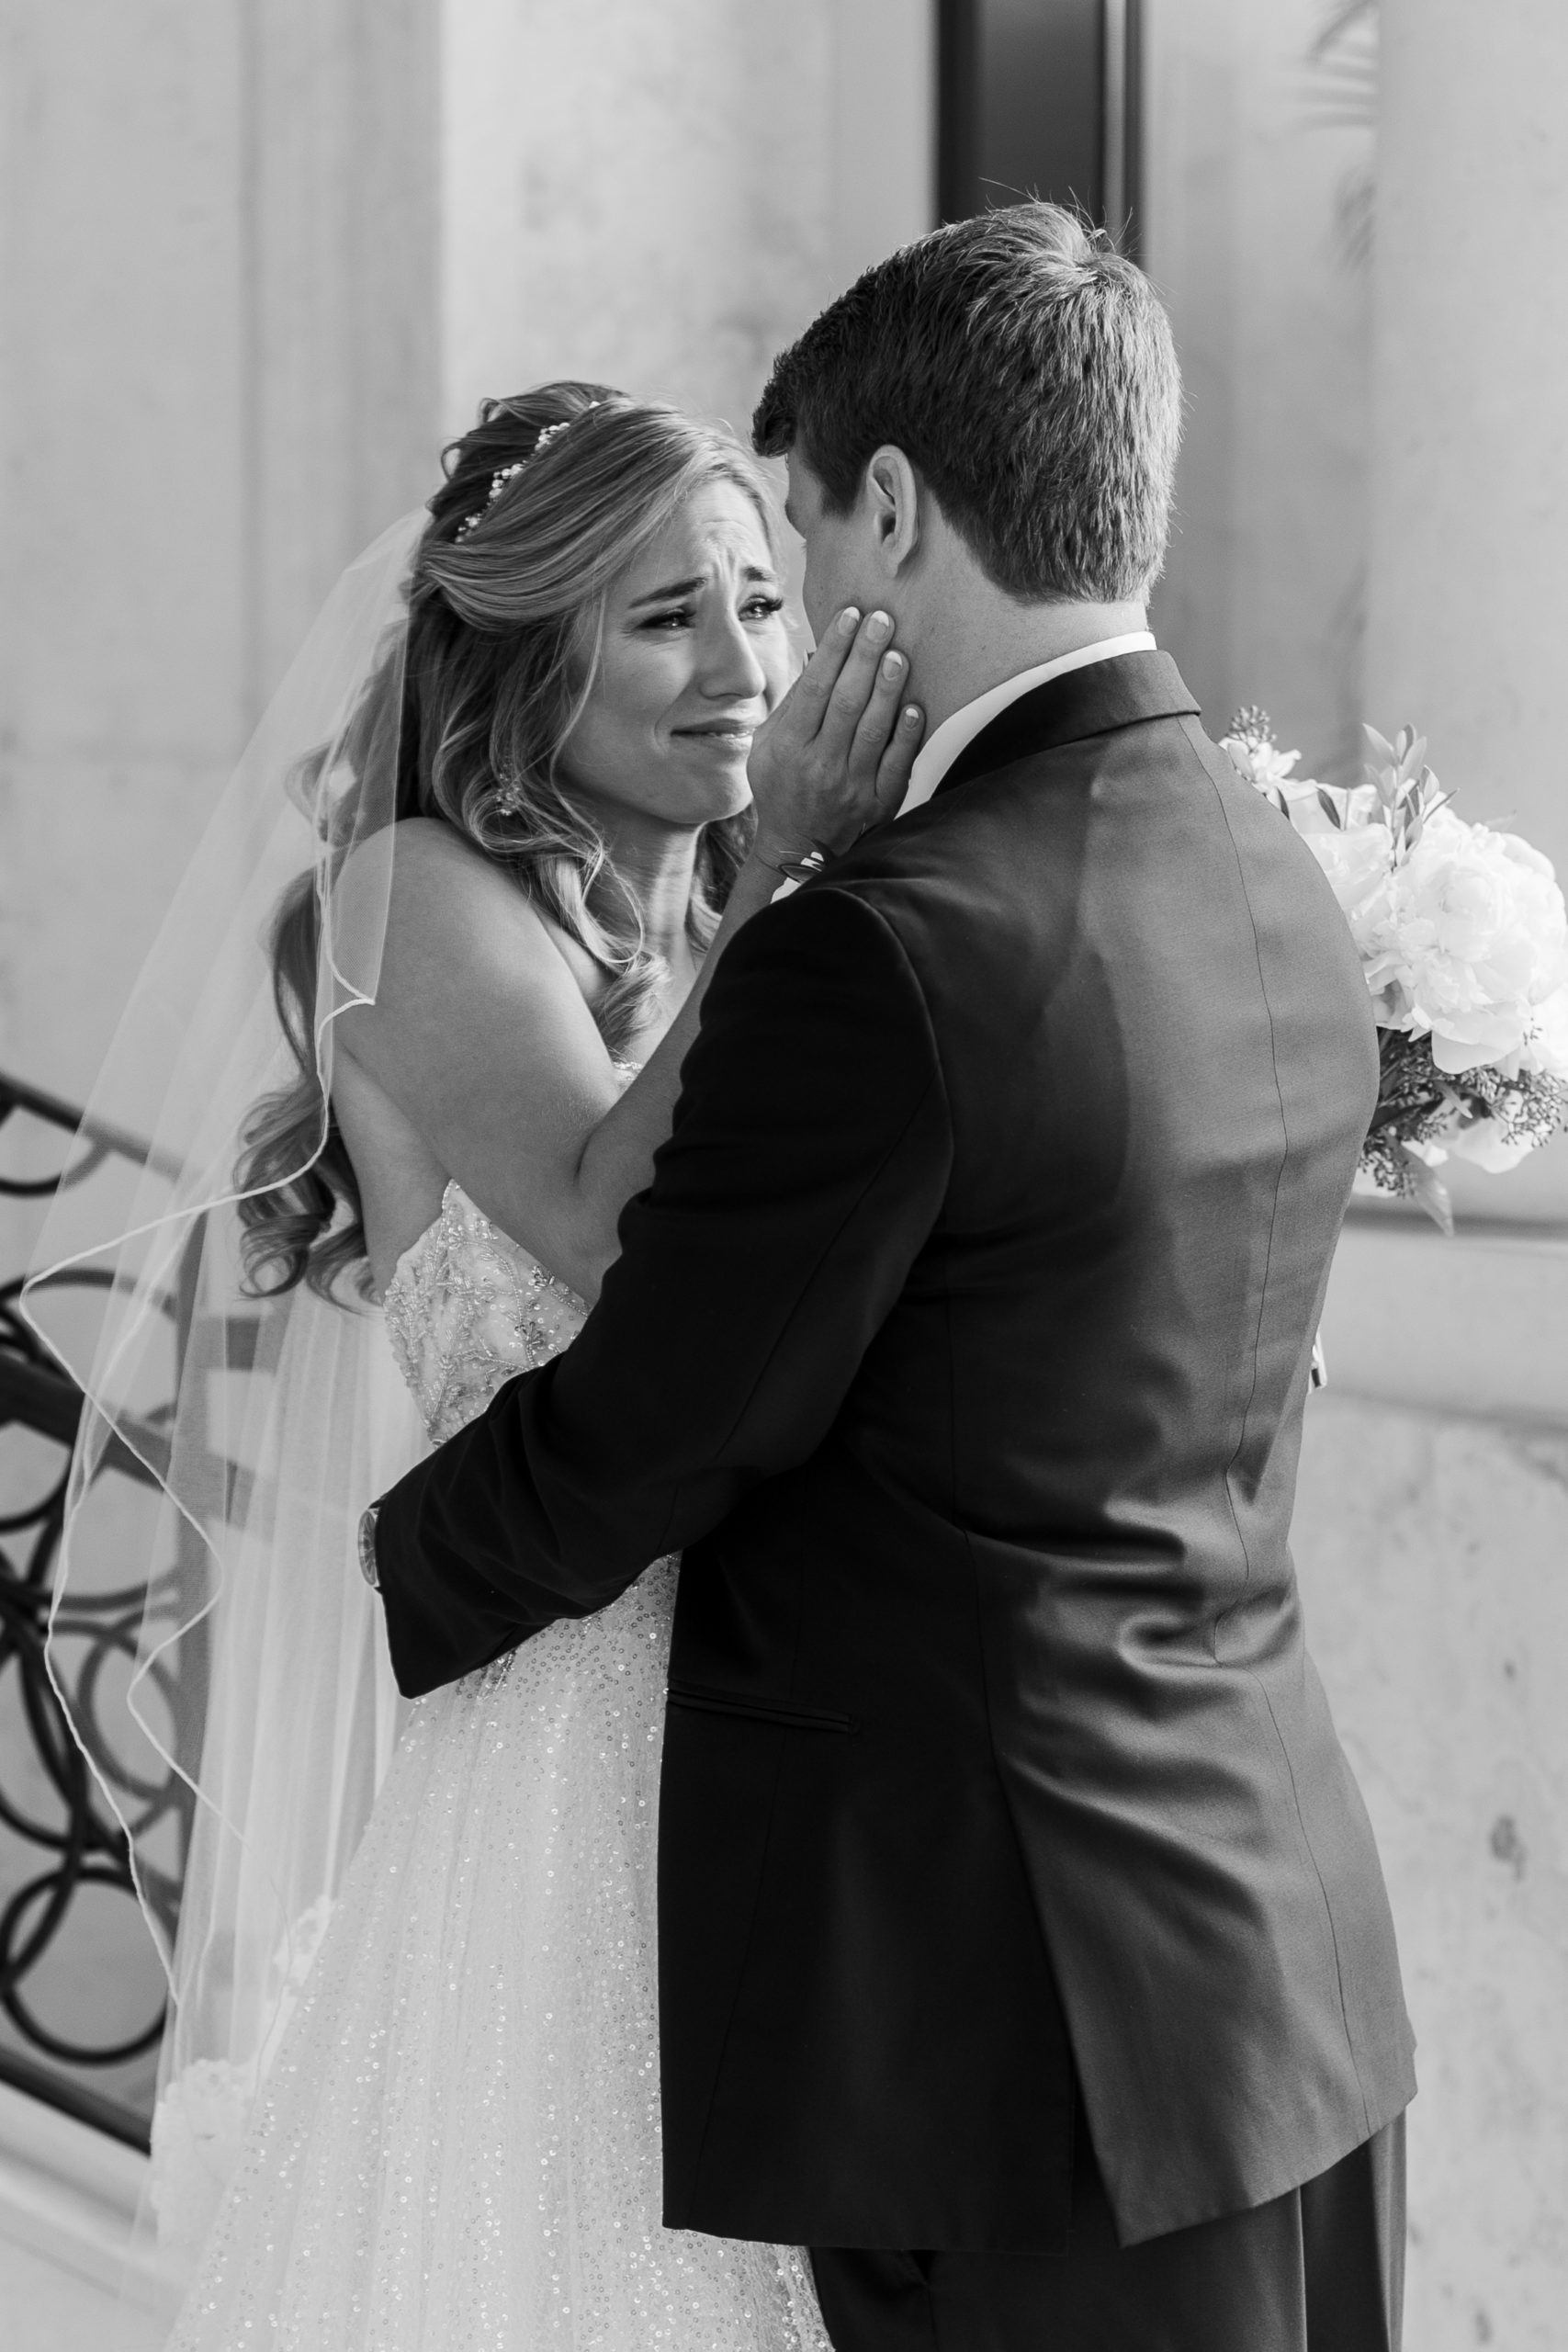 Emotional First Look with Bride and Groom Four Seasons Walt Disney World Wedding Photography